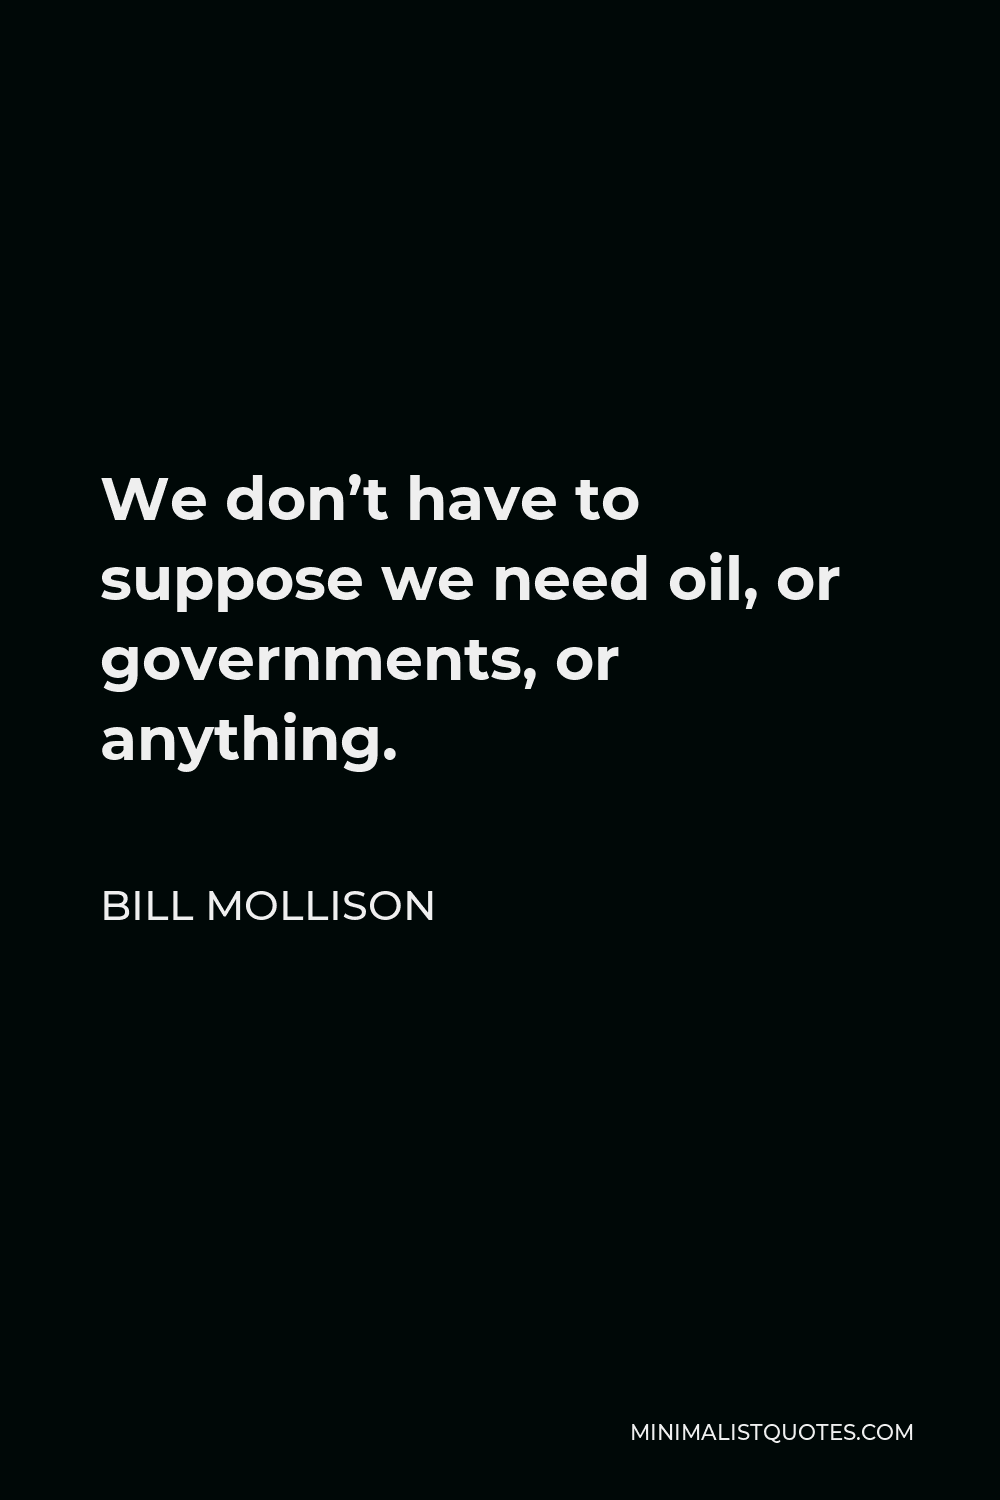 Bill Mollison Quote - We don’t have to suppose we need oil, or governments, or anything.